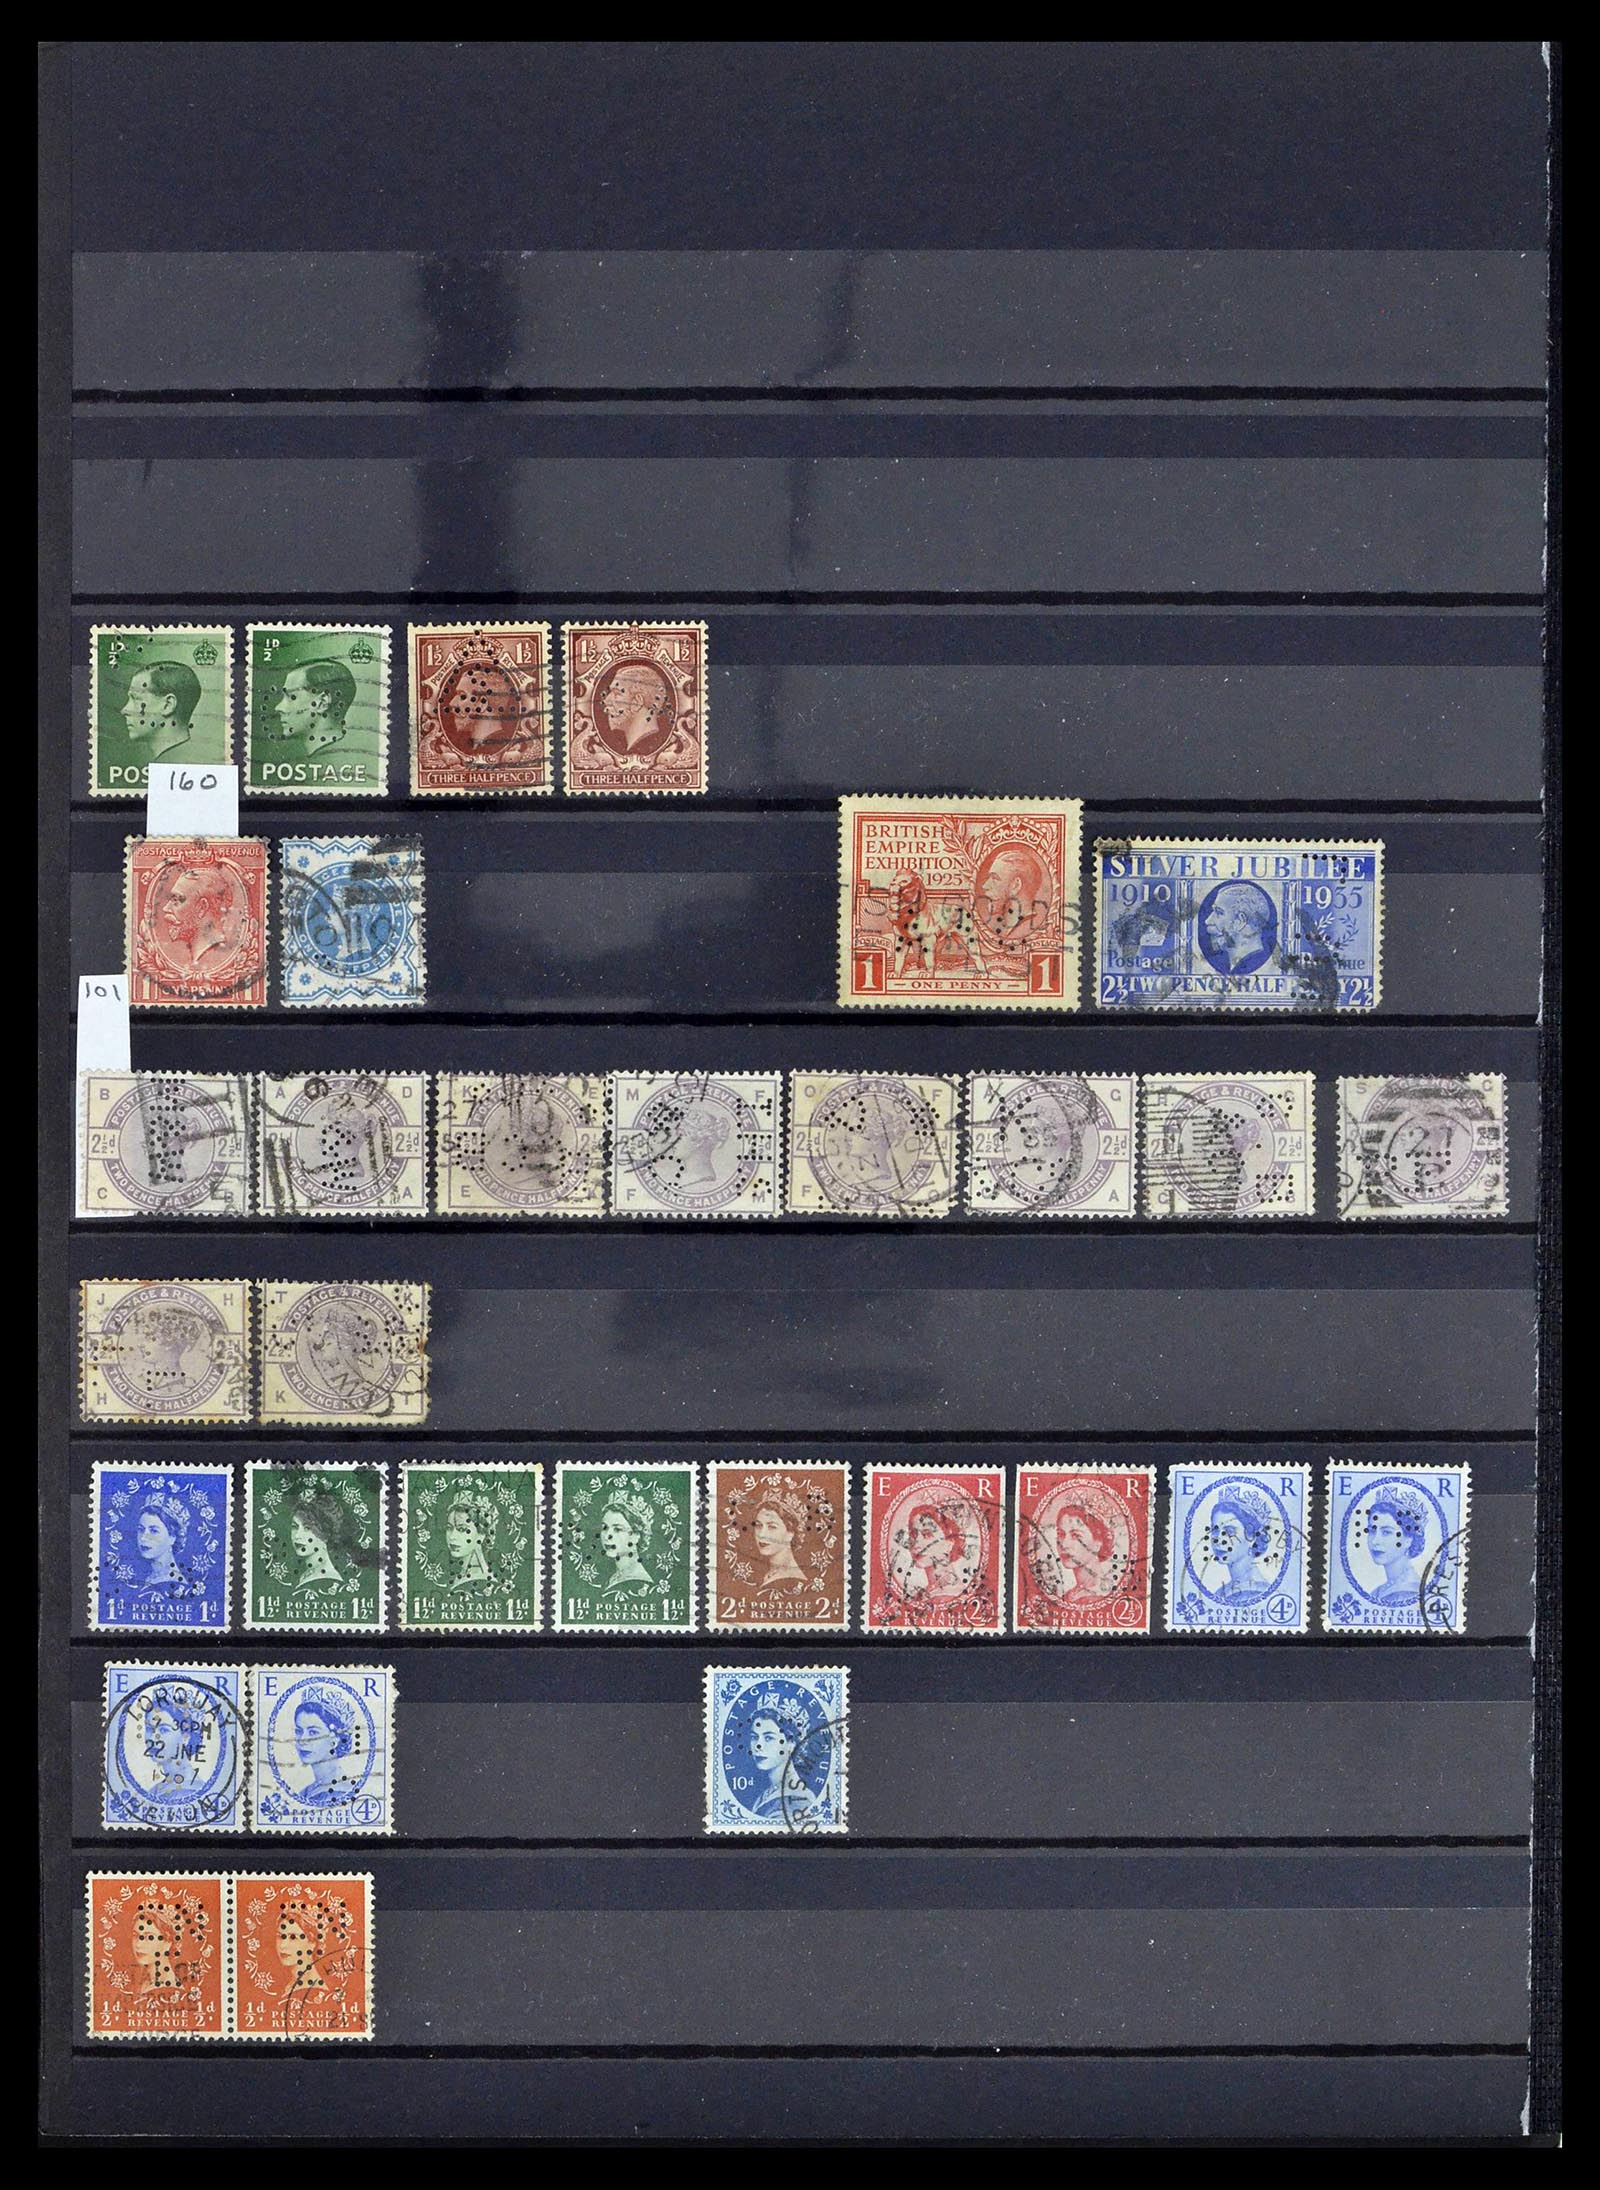 39196 0125 - Stamp collection 39196 Great Britain 1844-1955.